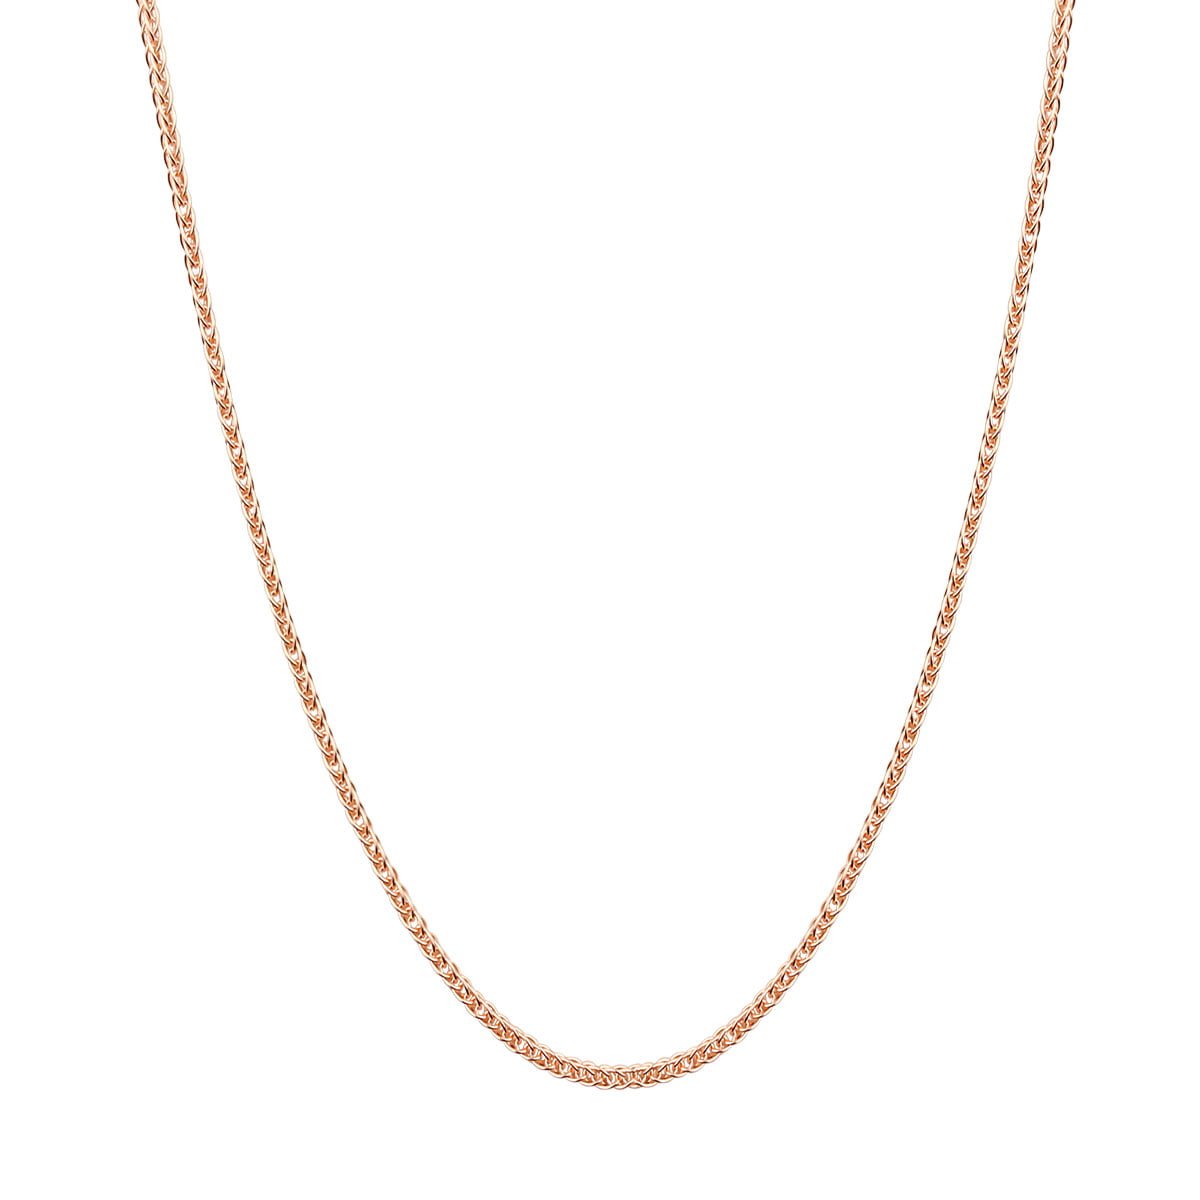 18ct Rose Gold 17inch Wheat Chain Necklace